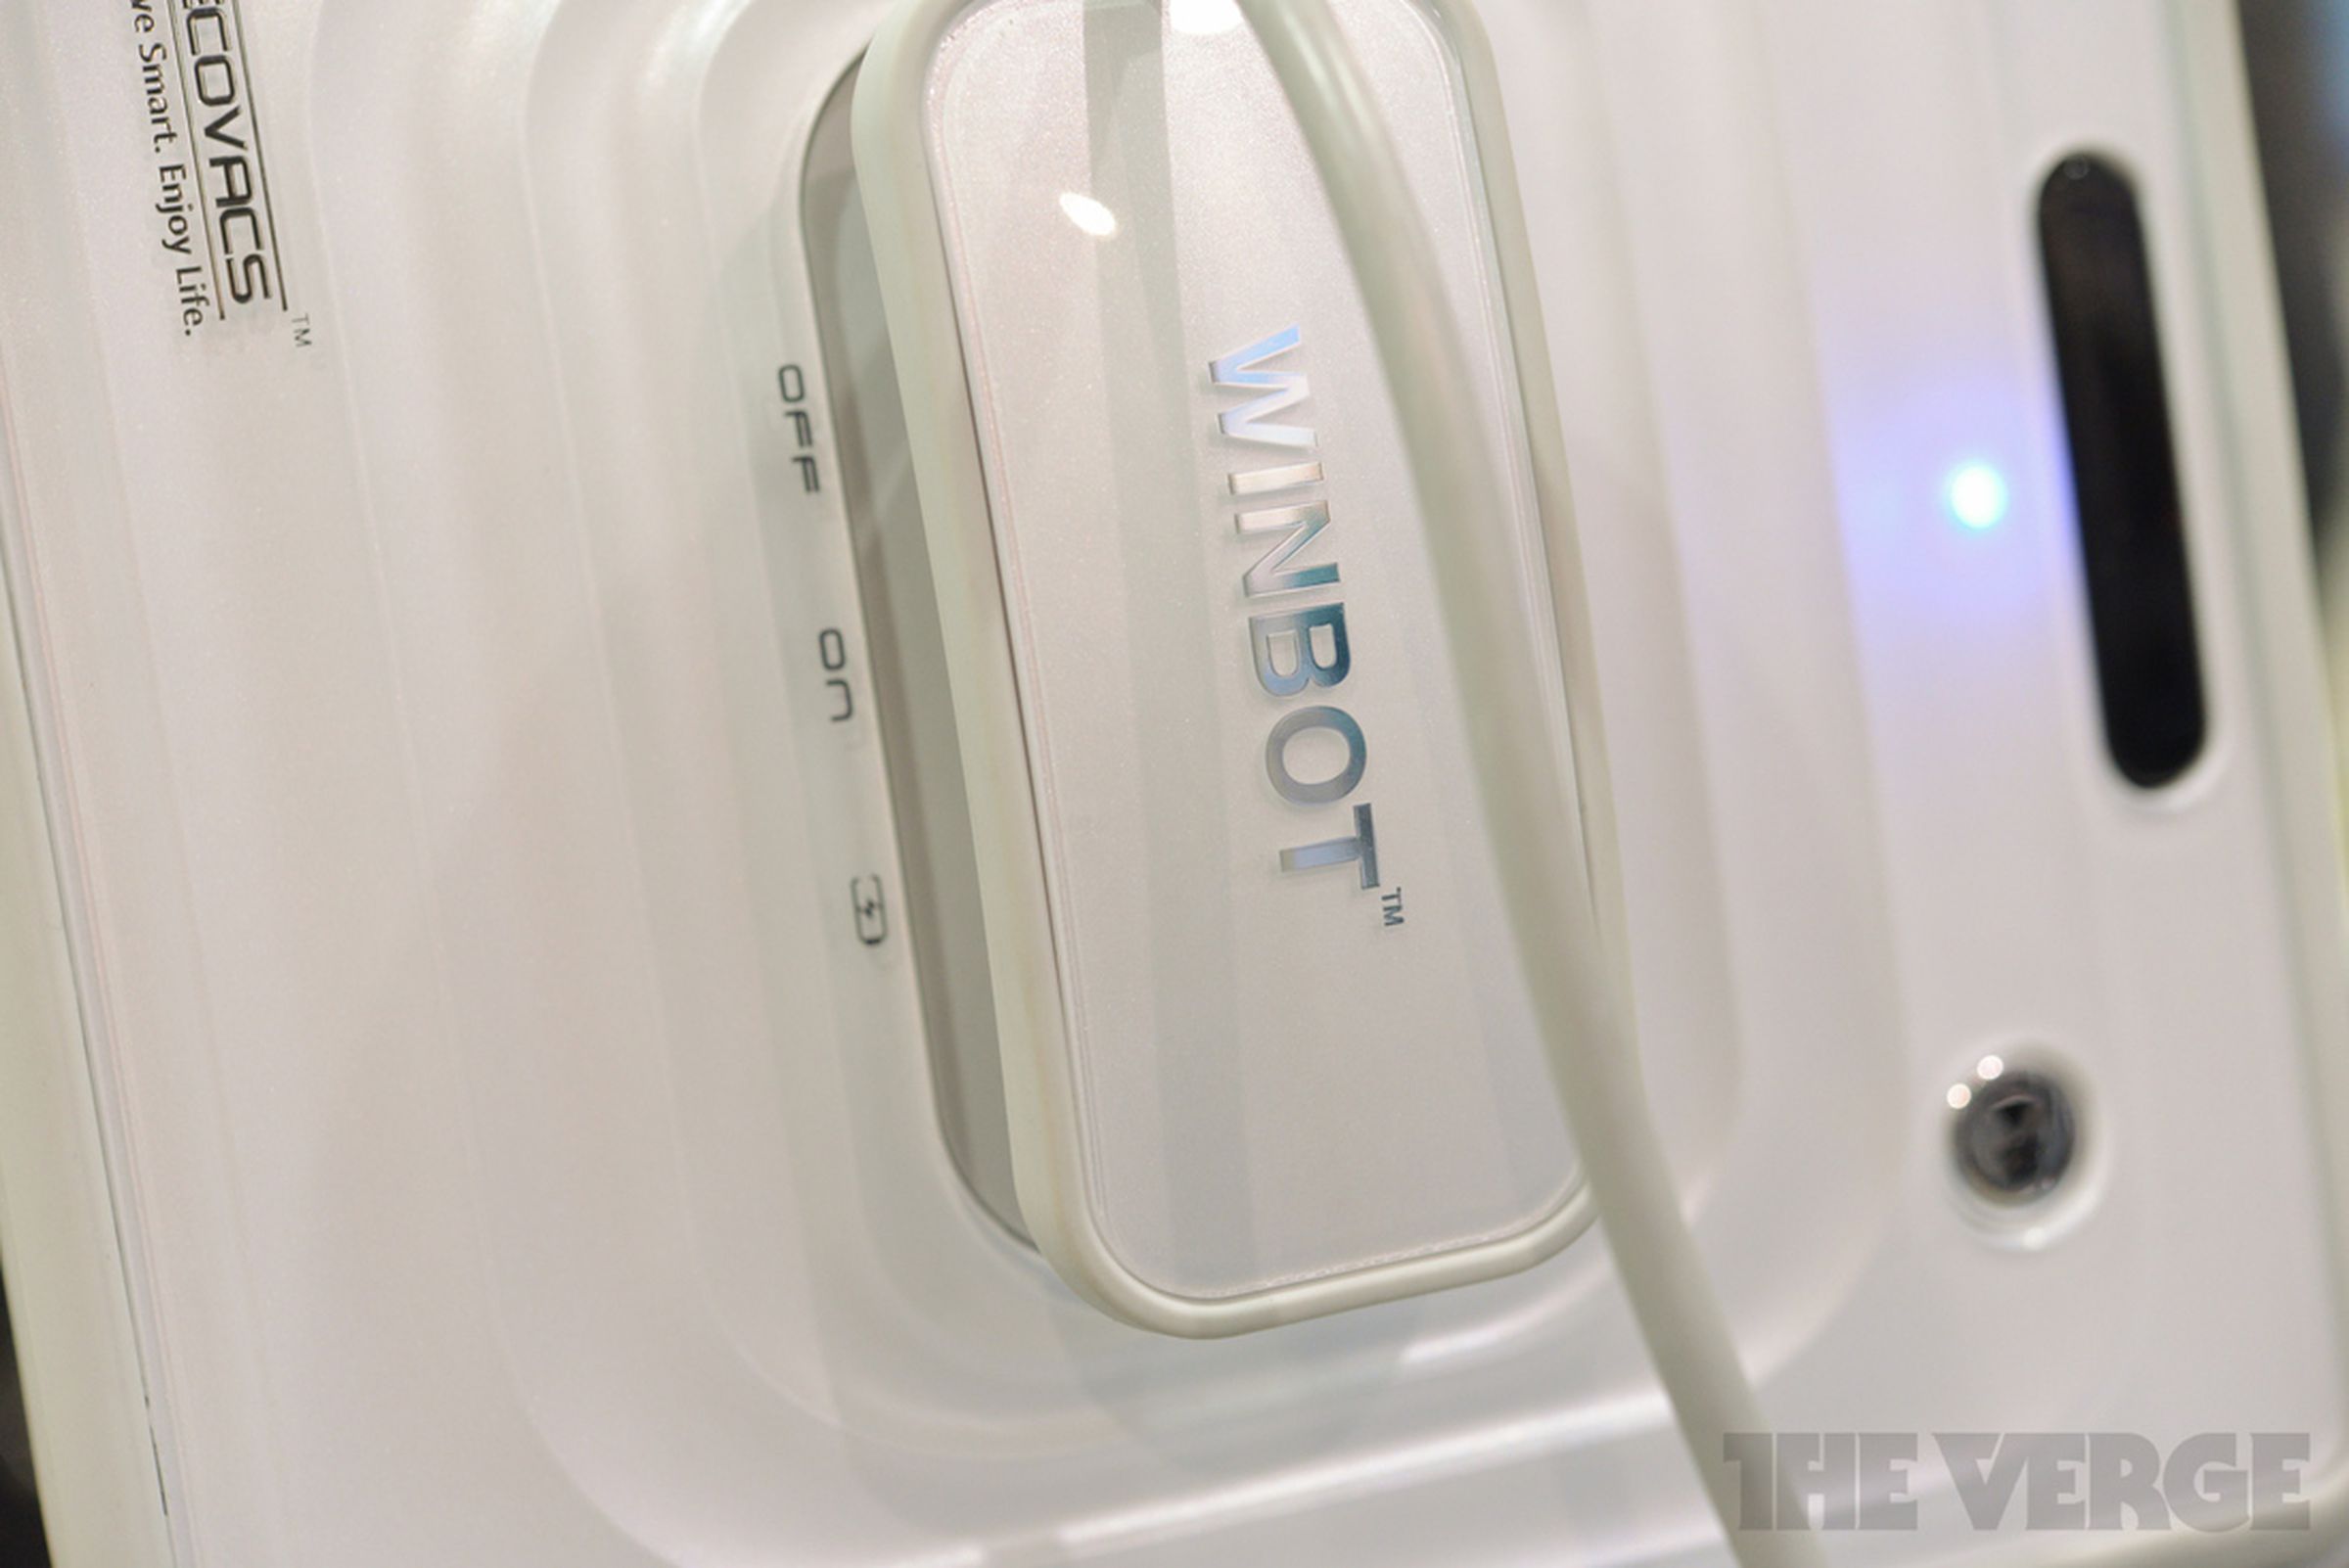 Ecovacs Winbot 7 hands-on photos